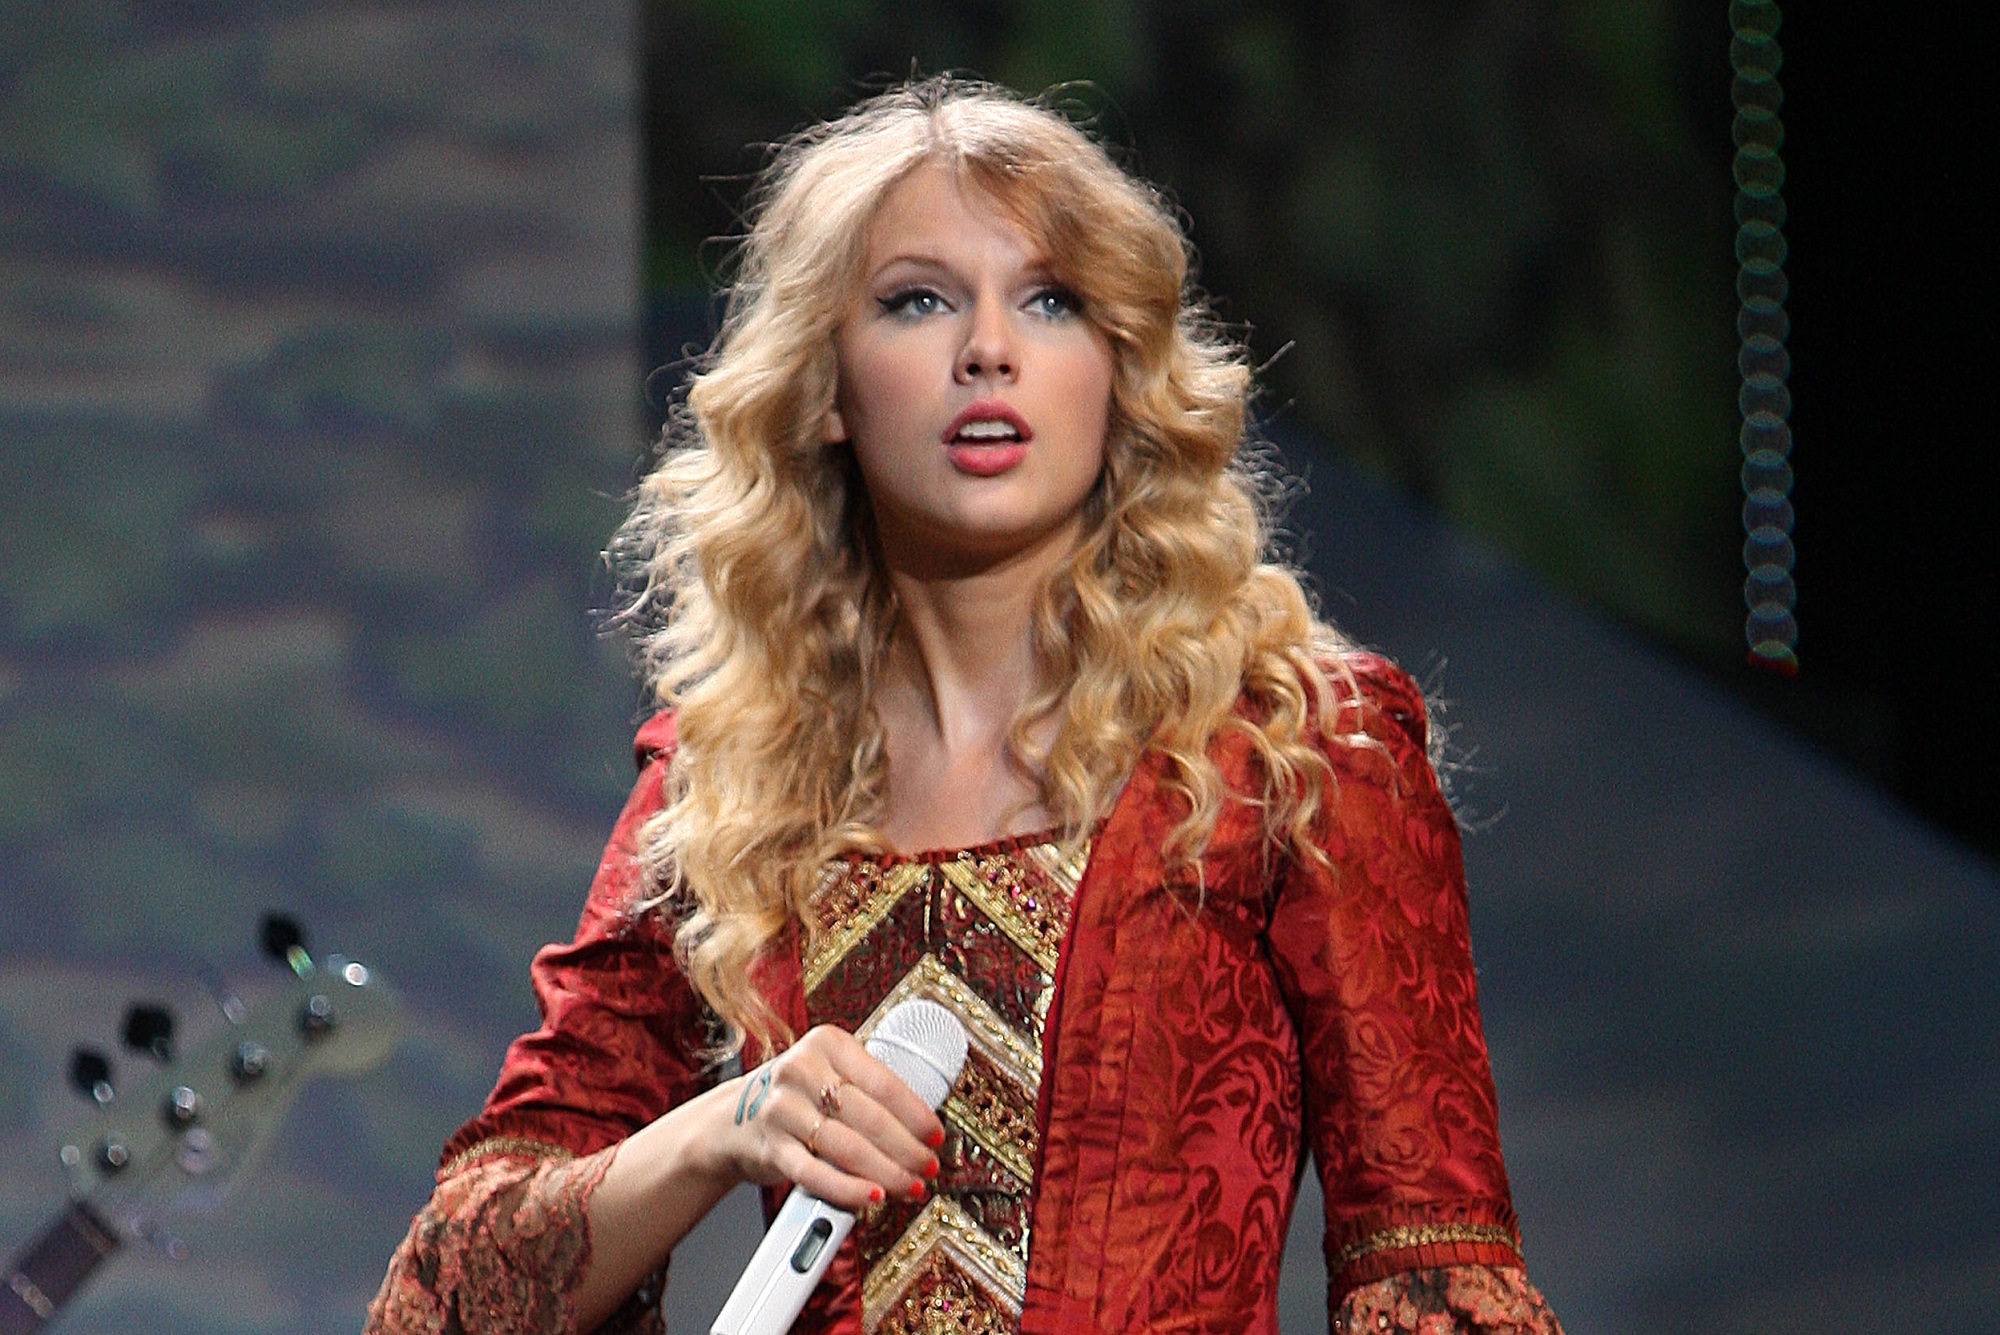 Taylor Swift performs 'Love Story' during the Fearless Tour on August 27, 2009 in New York City.